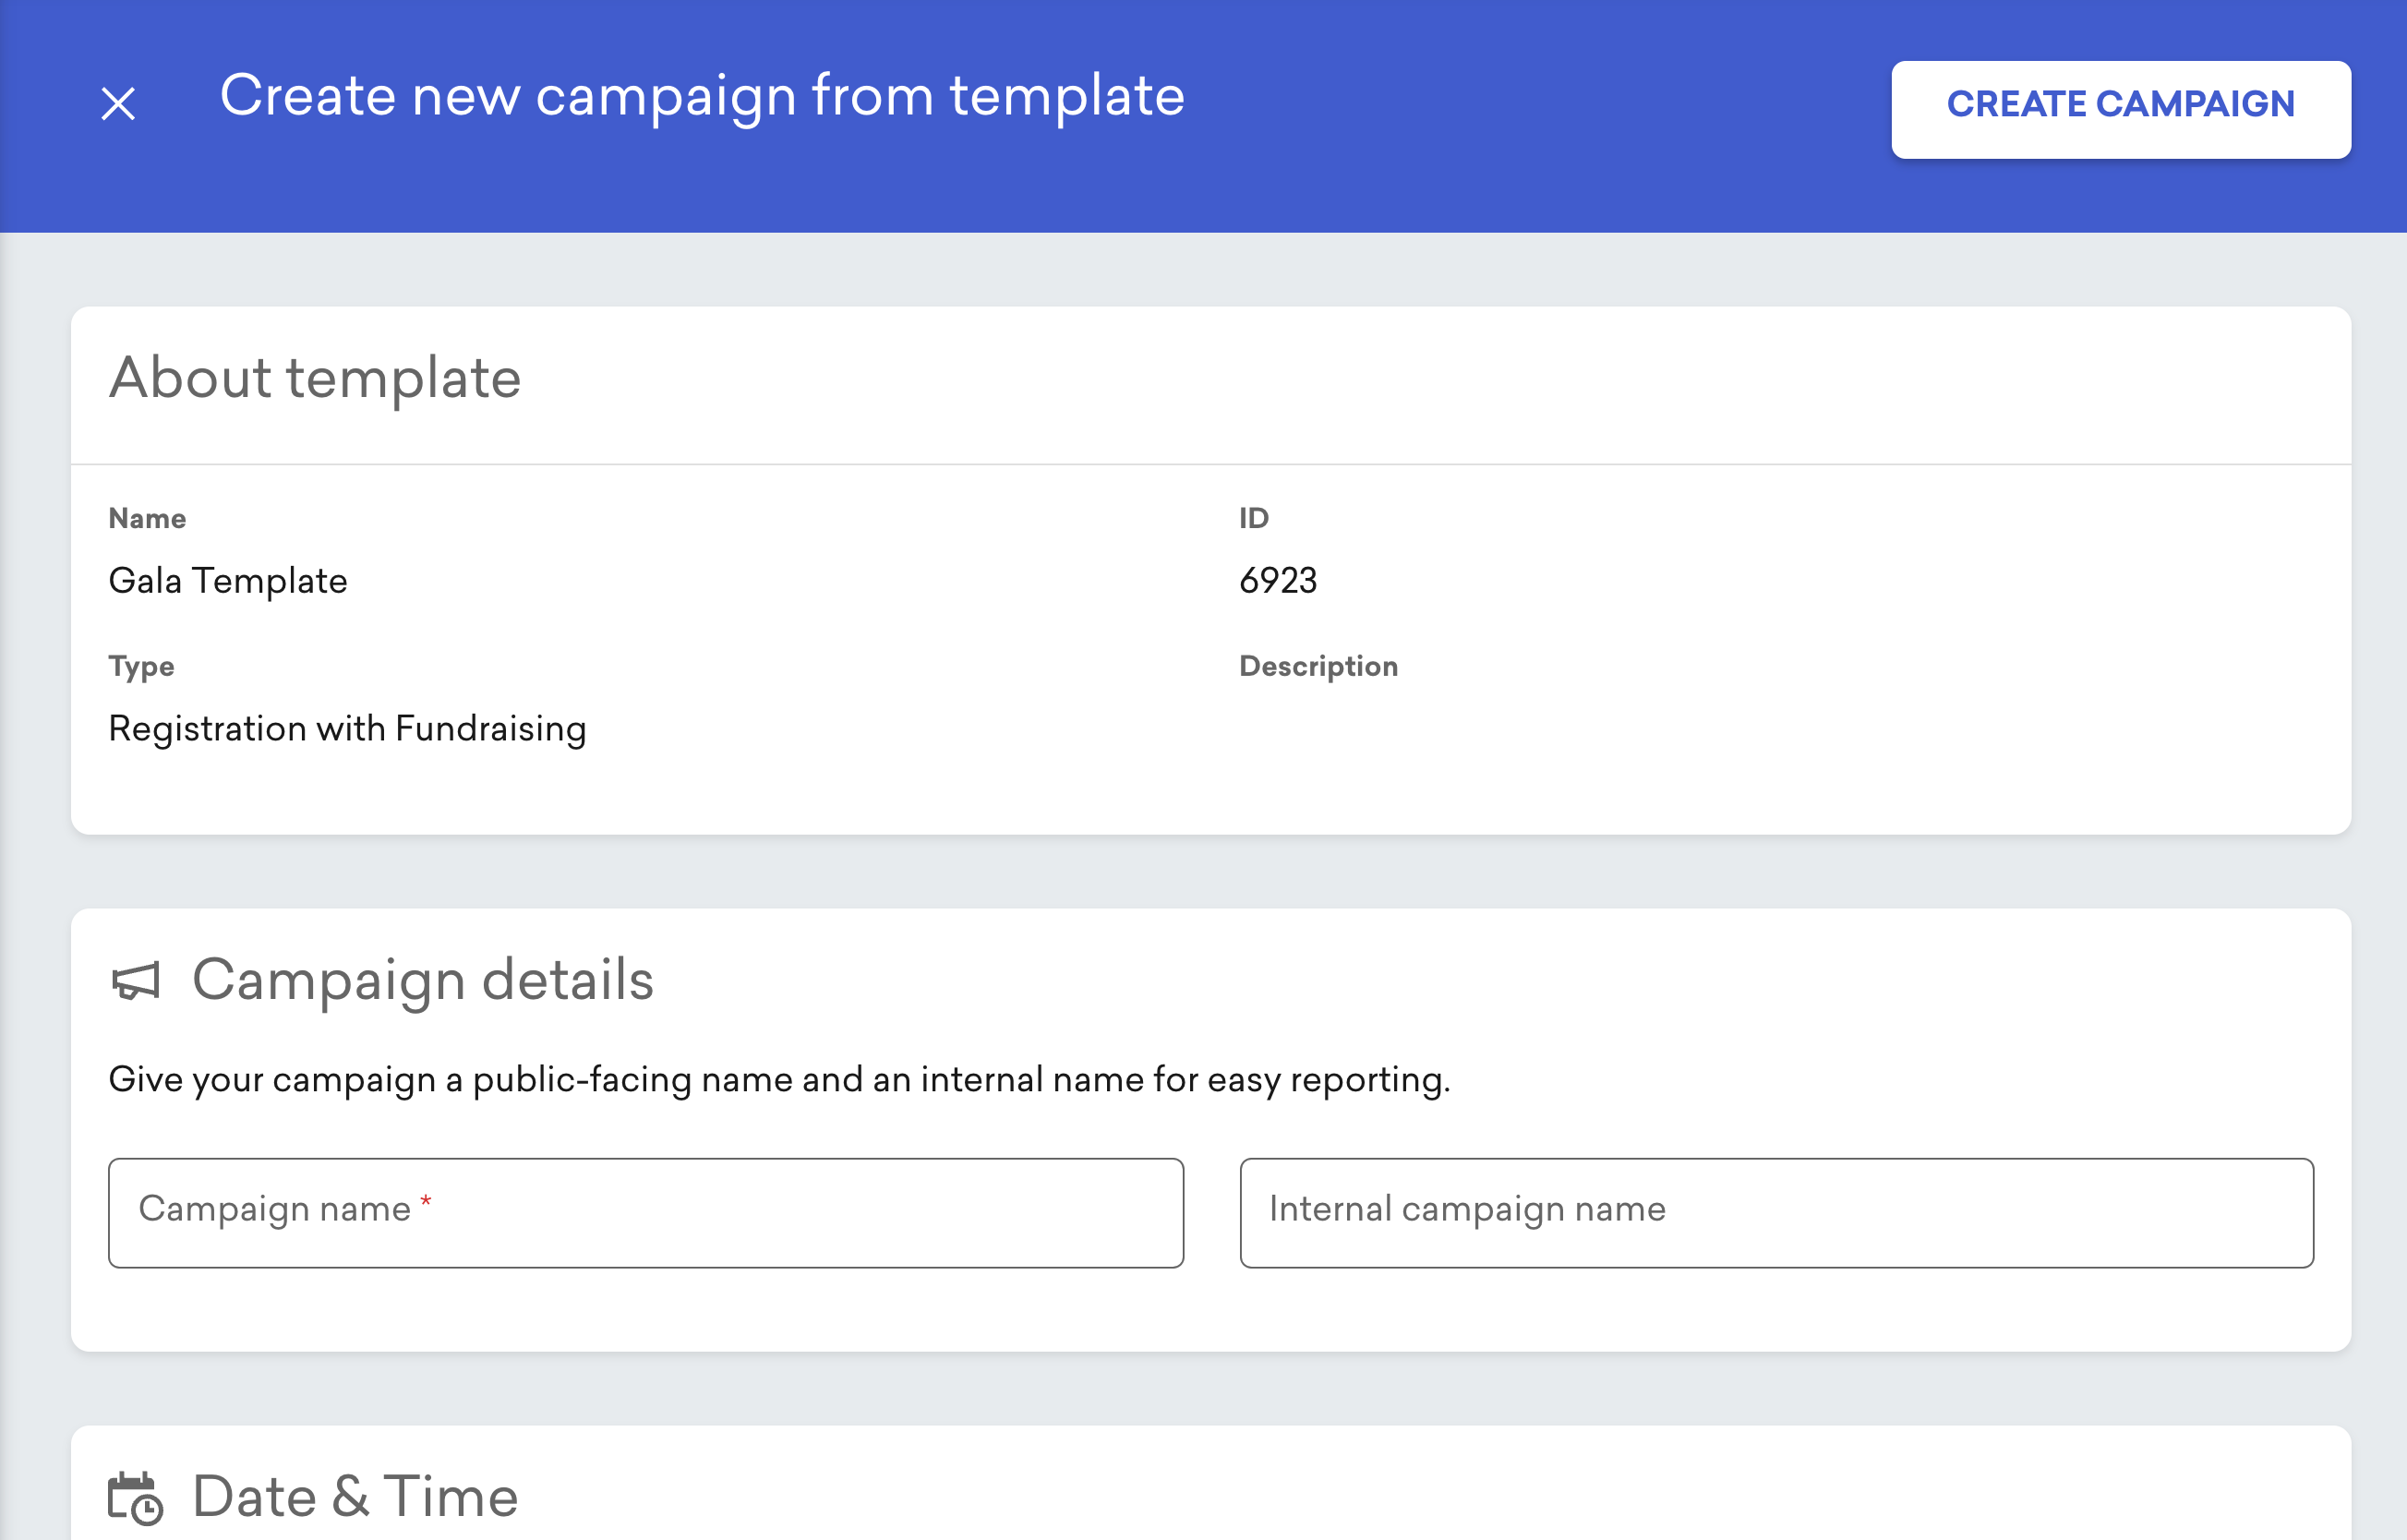 How to Create a Campaign